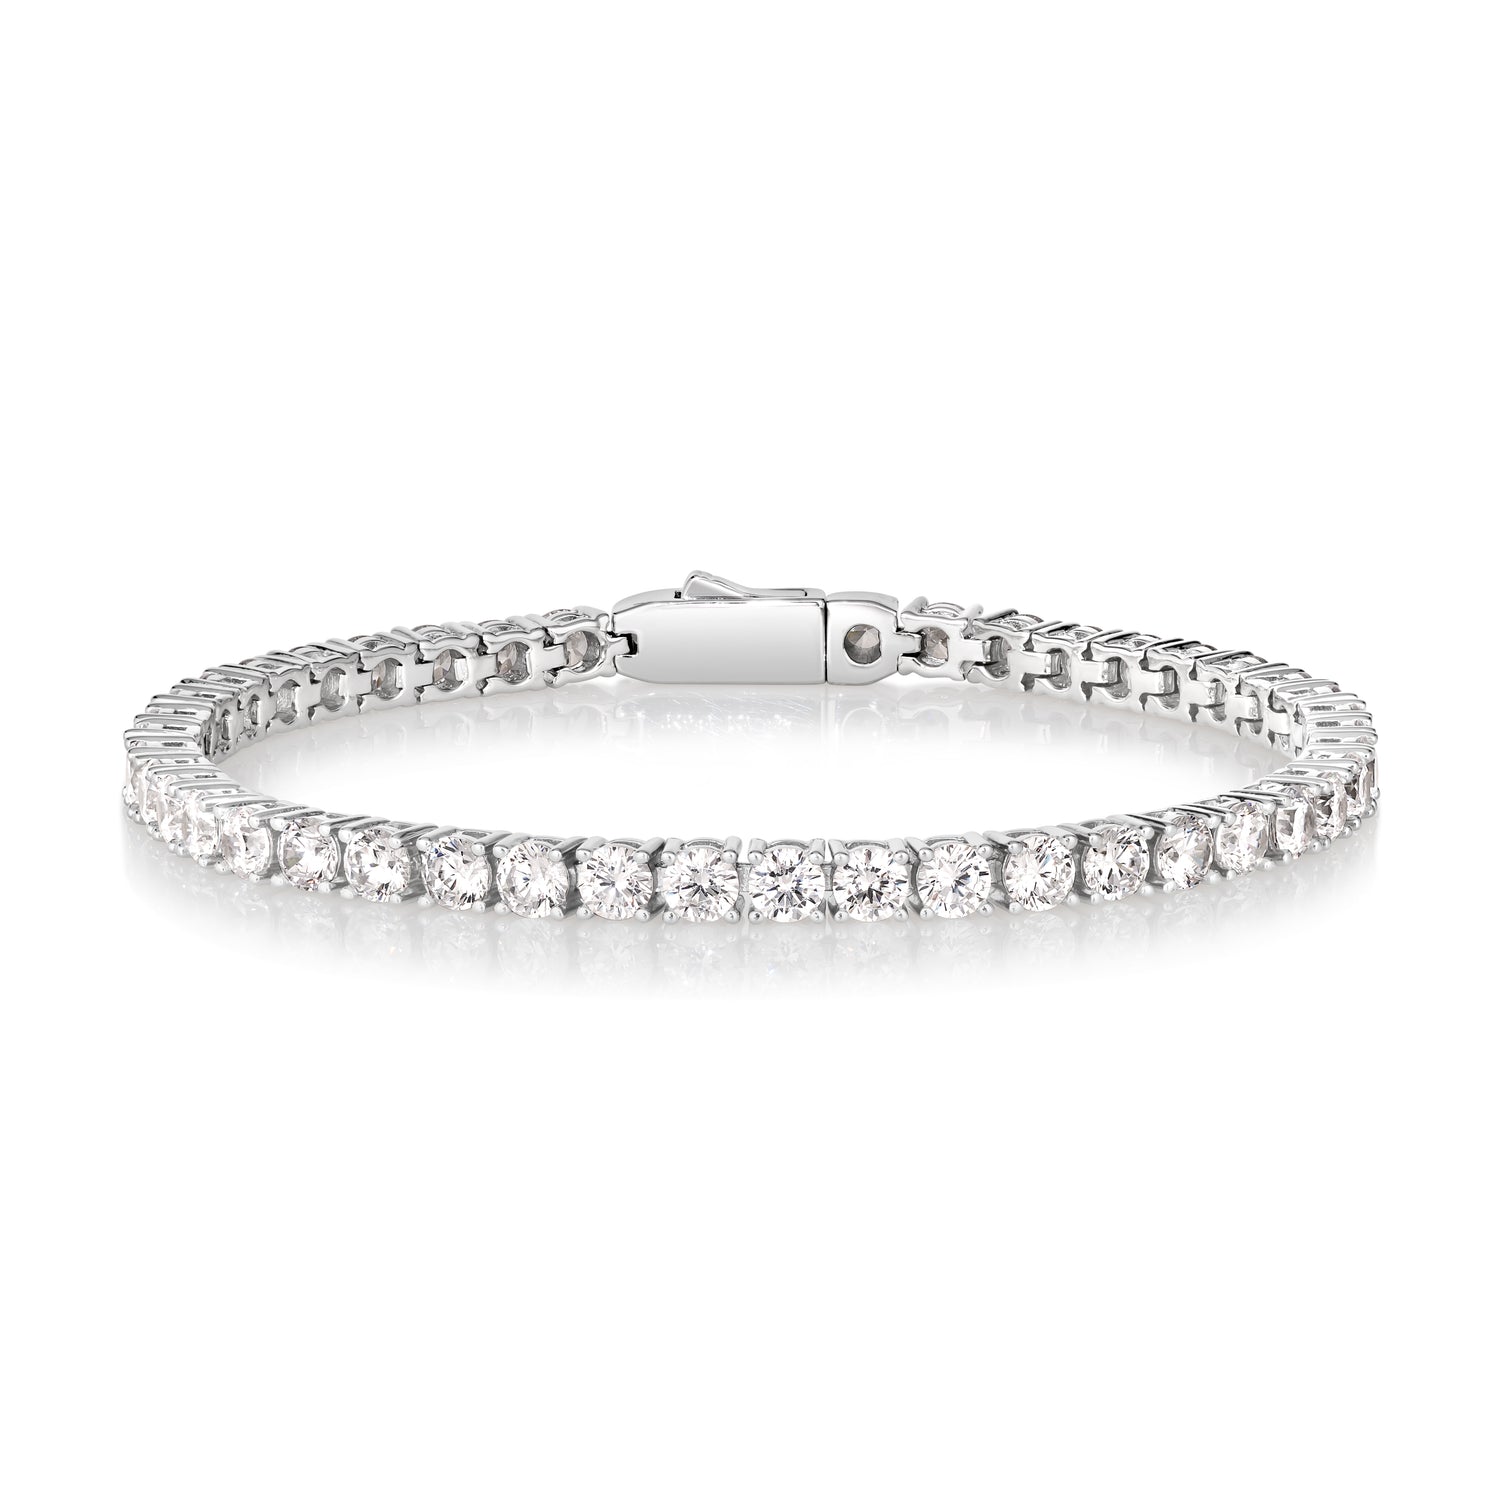 Find the Anna Zuckerman collection at Brentwood Jewelry - Brentwood Jewelry